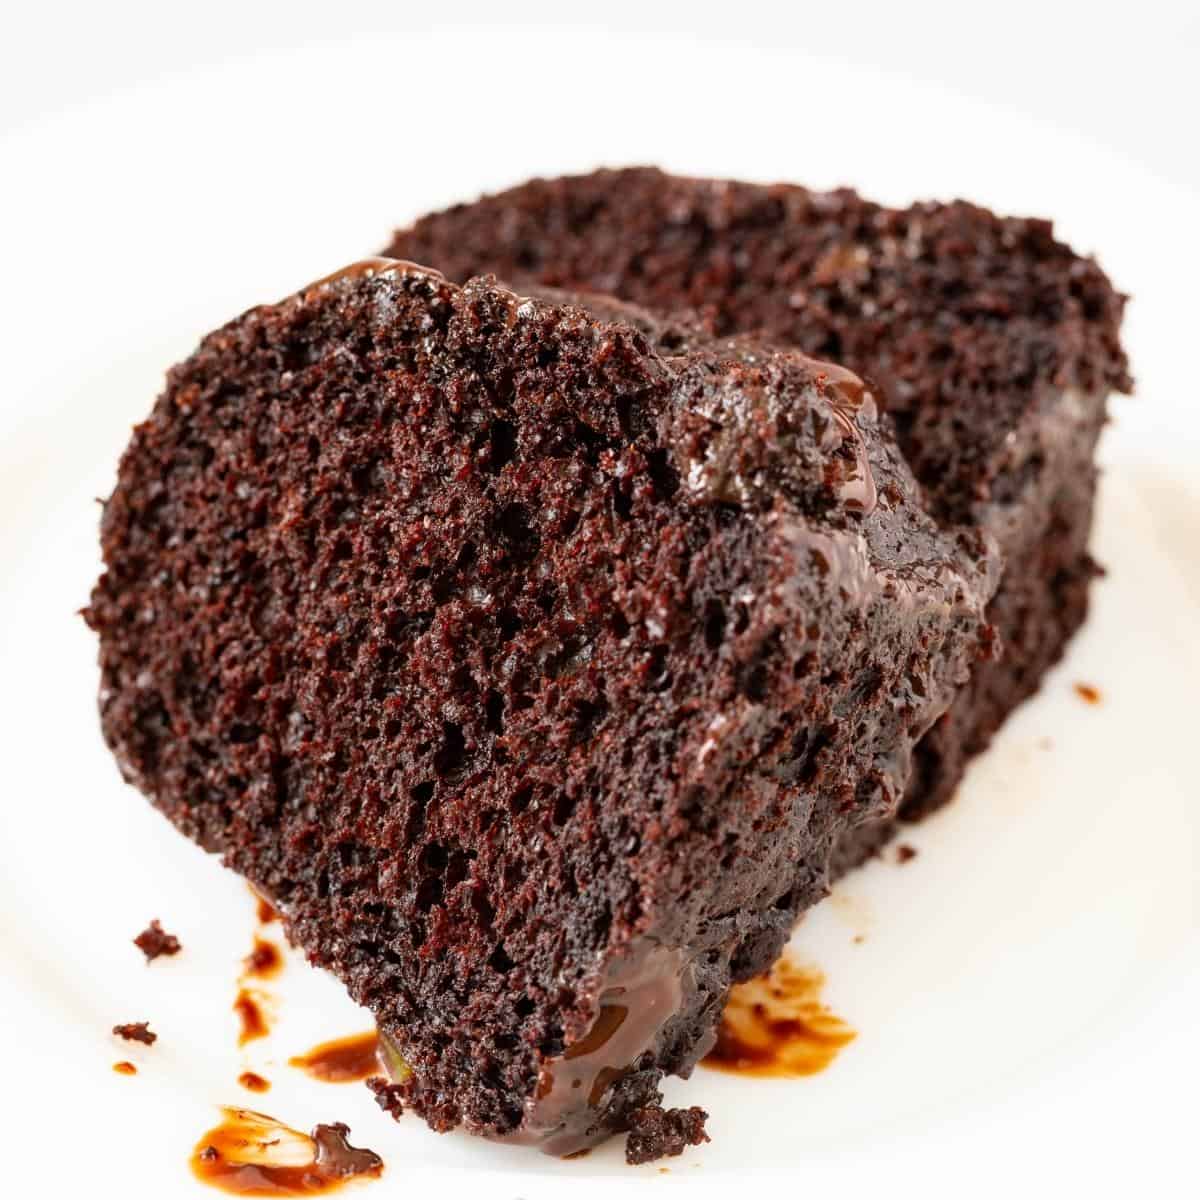 Two slices of chocolate bundt cake.